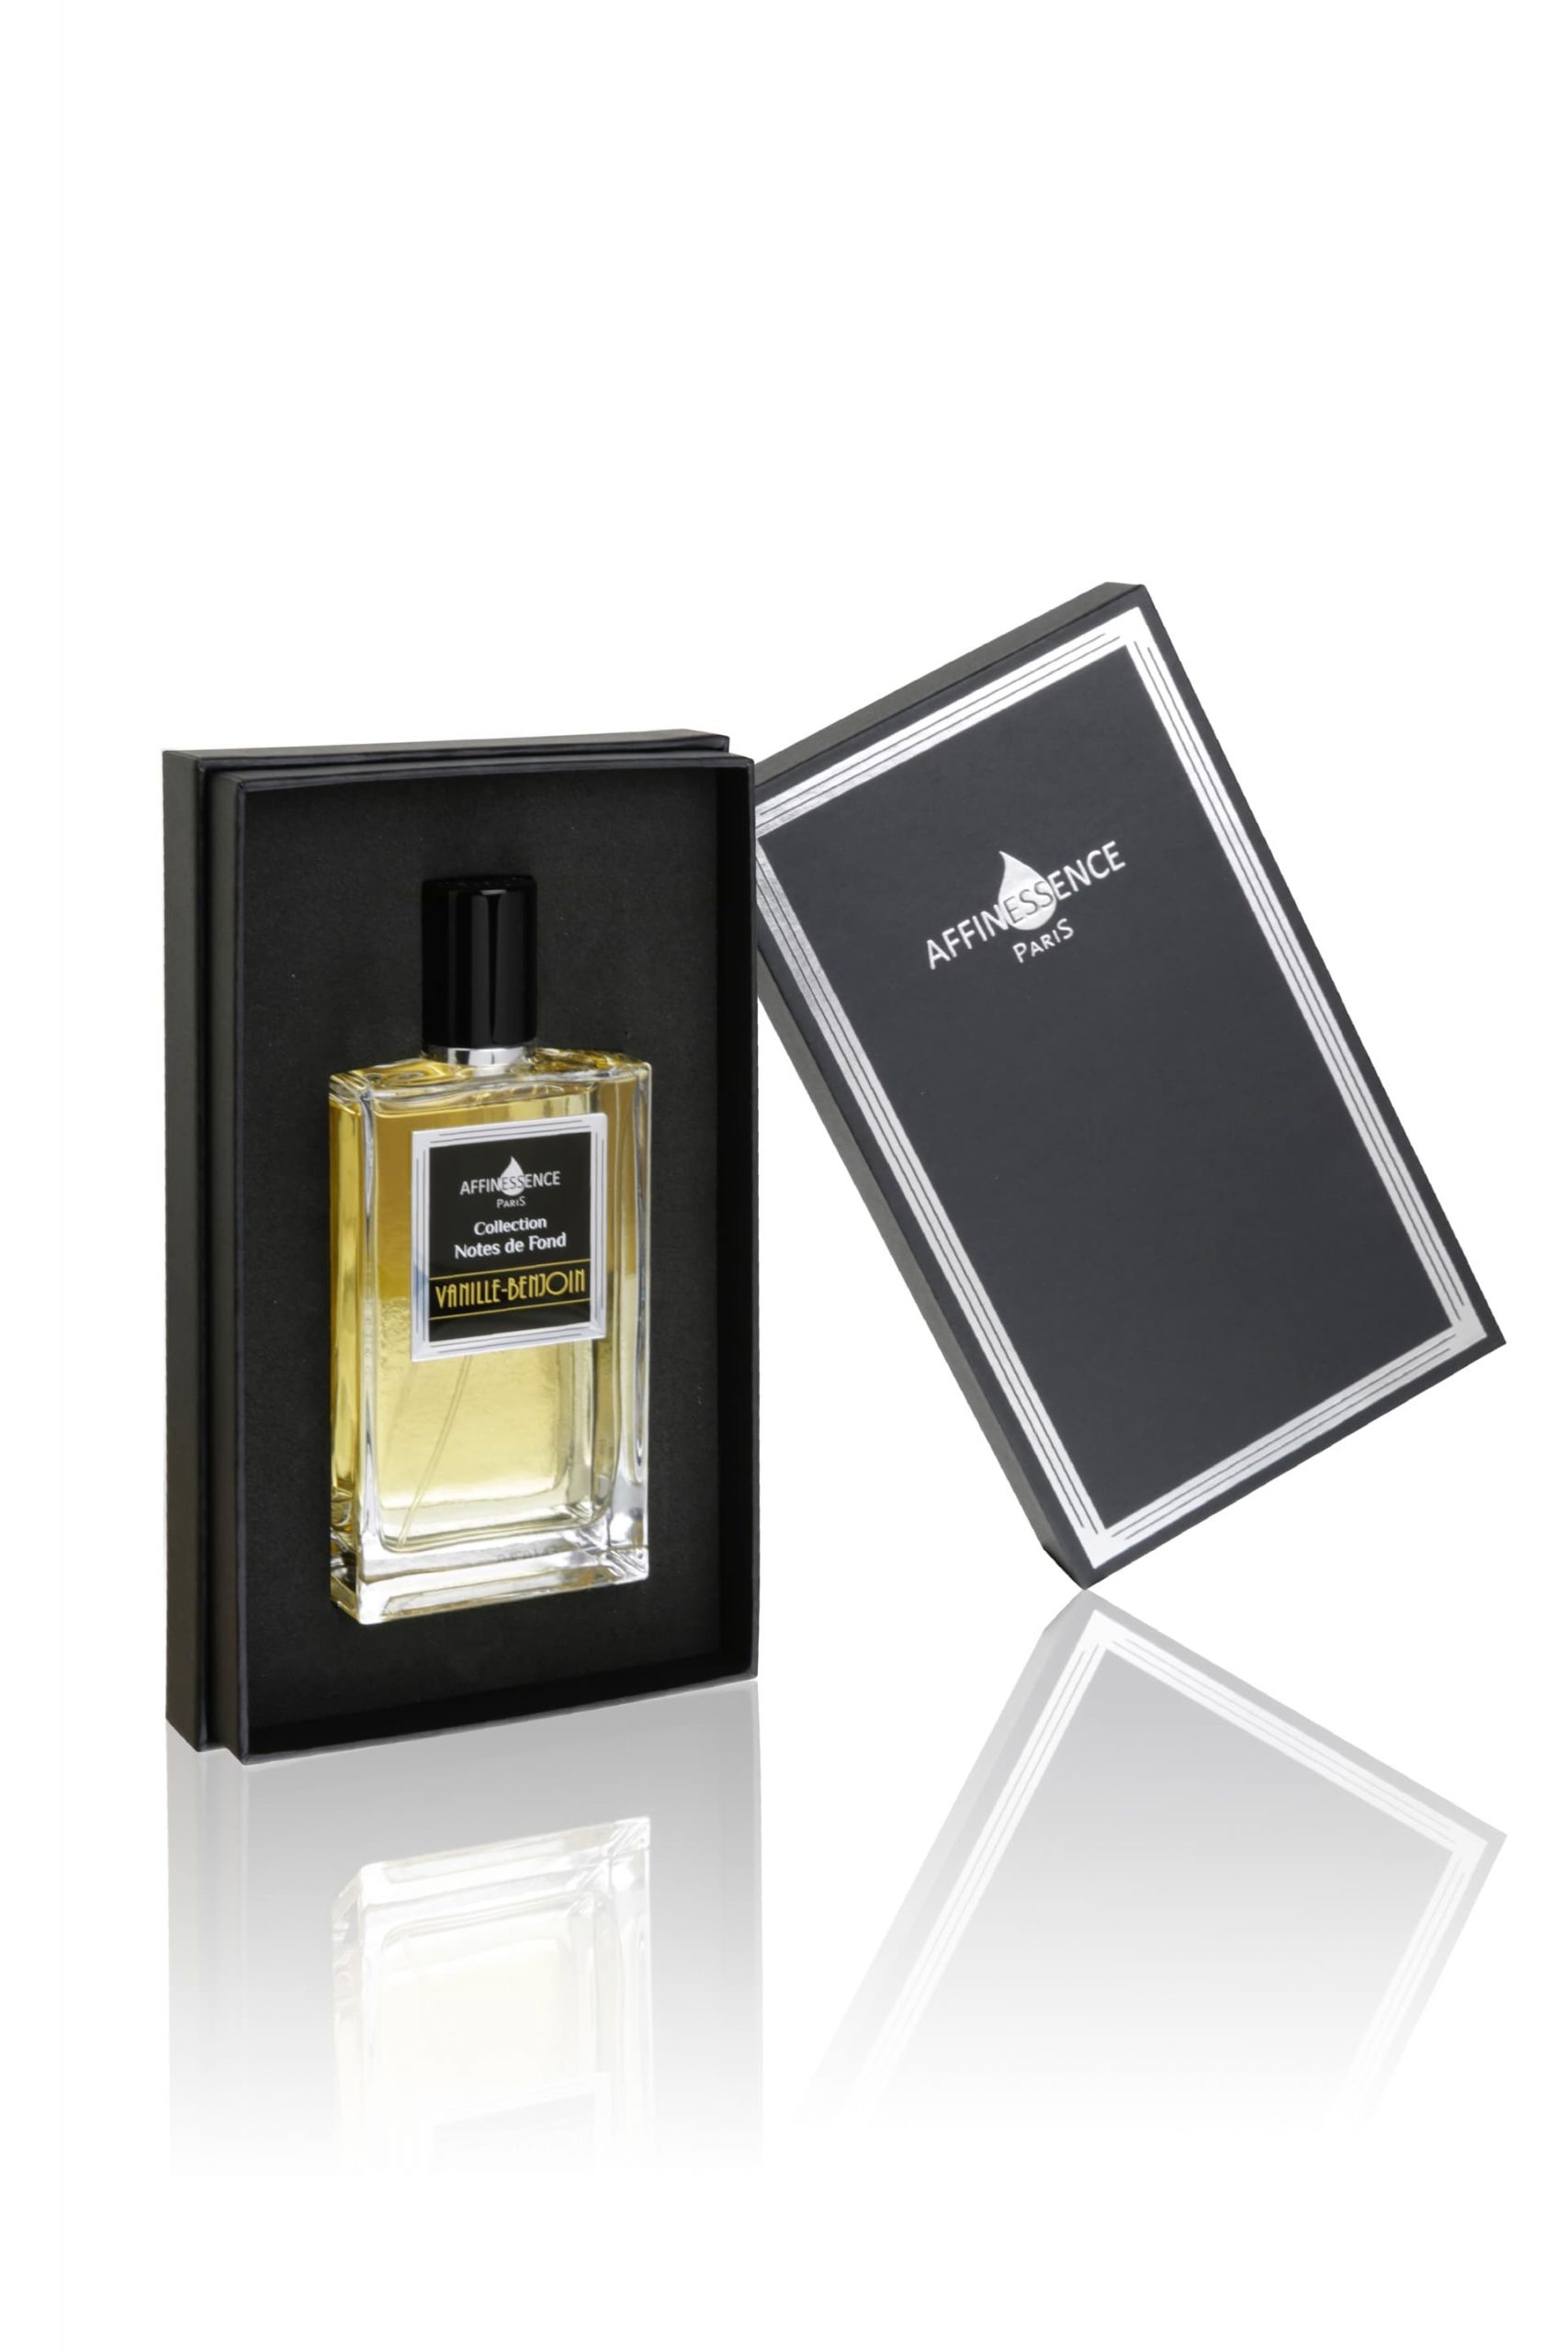 100ml-vanille-benjoin-classic-affinessence-scaled-1.jpg